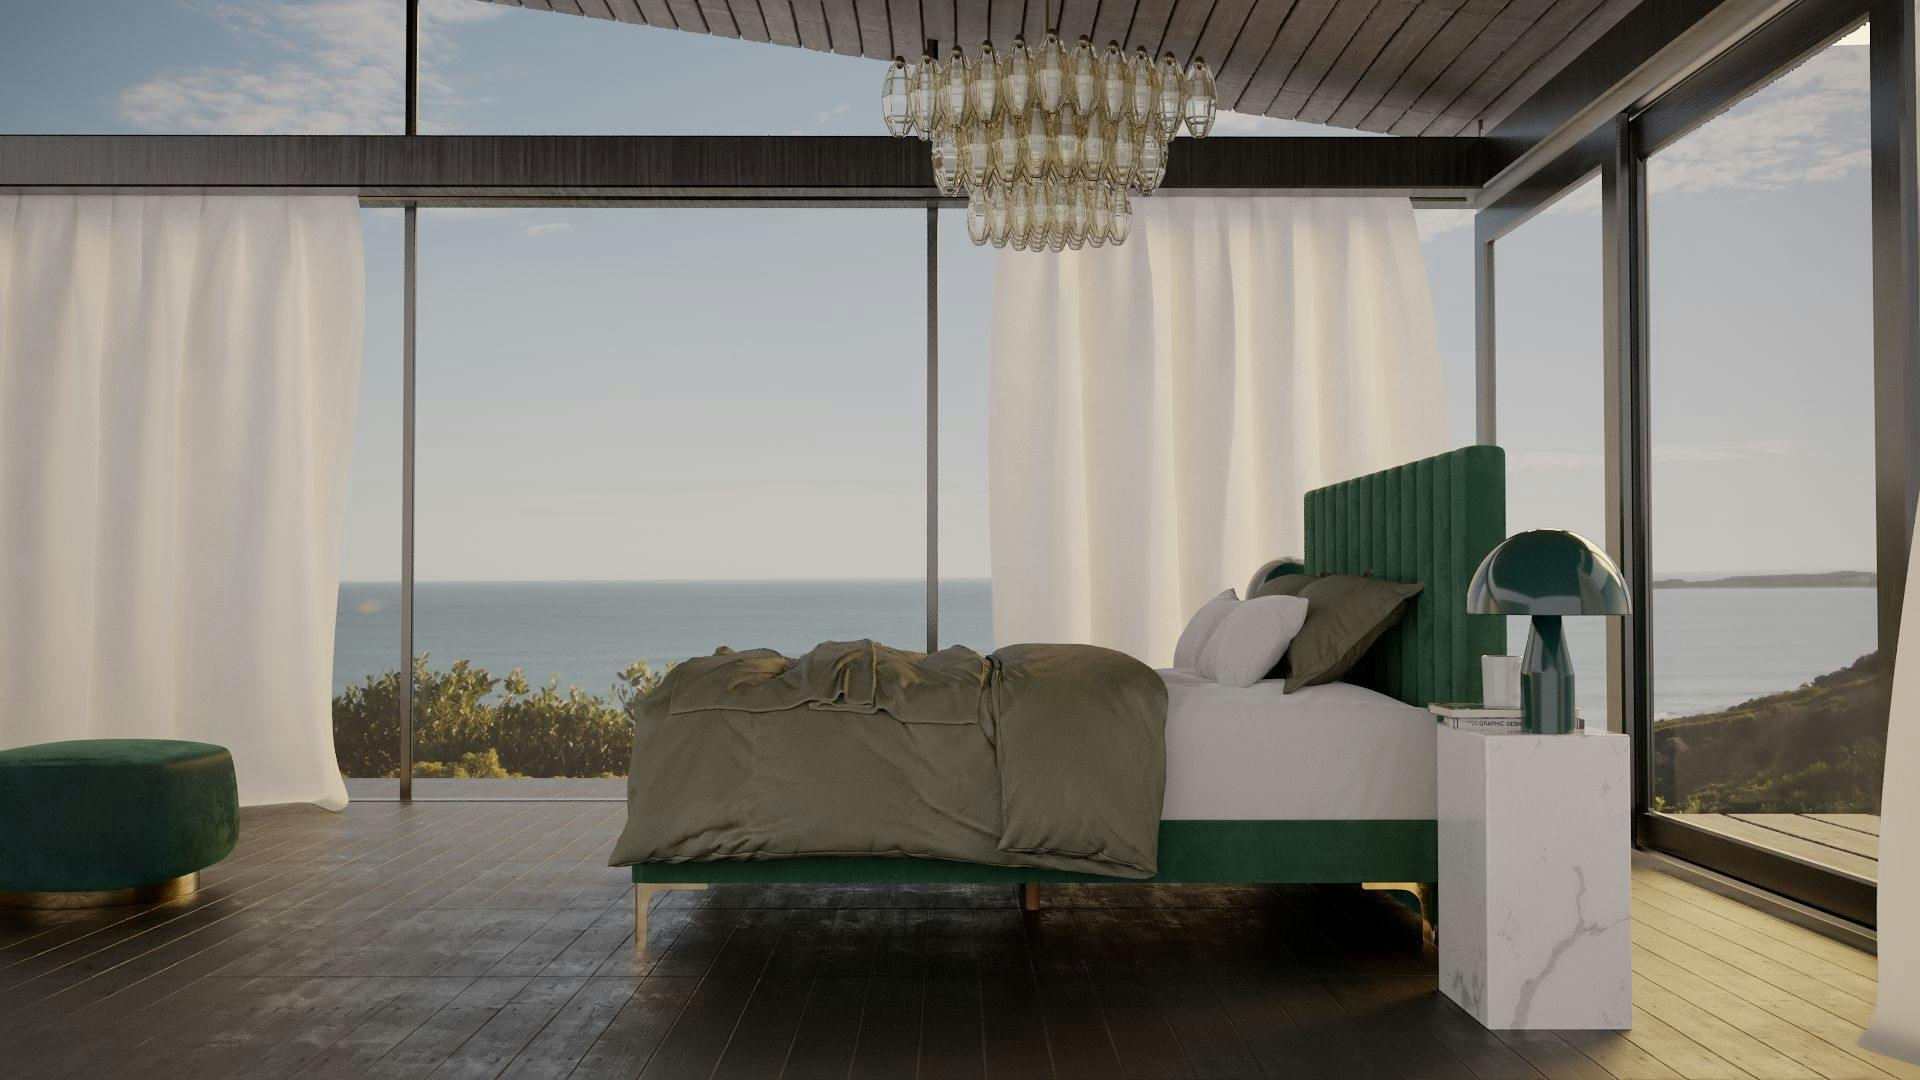 The Palais SD Indestruct Bed in Jade, in a luxurious bedroom overlooking a tranquil and winding coastline.